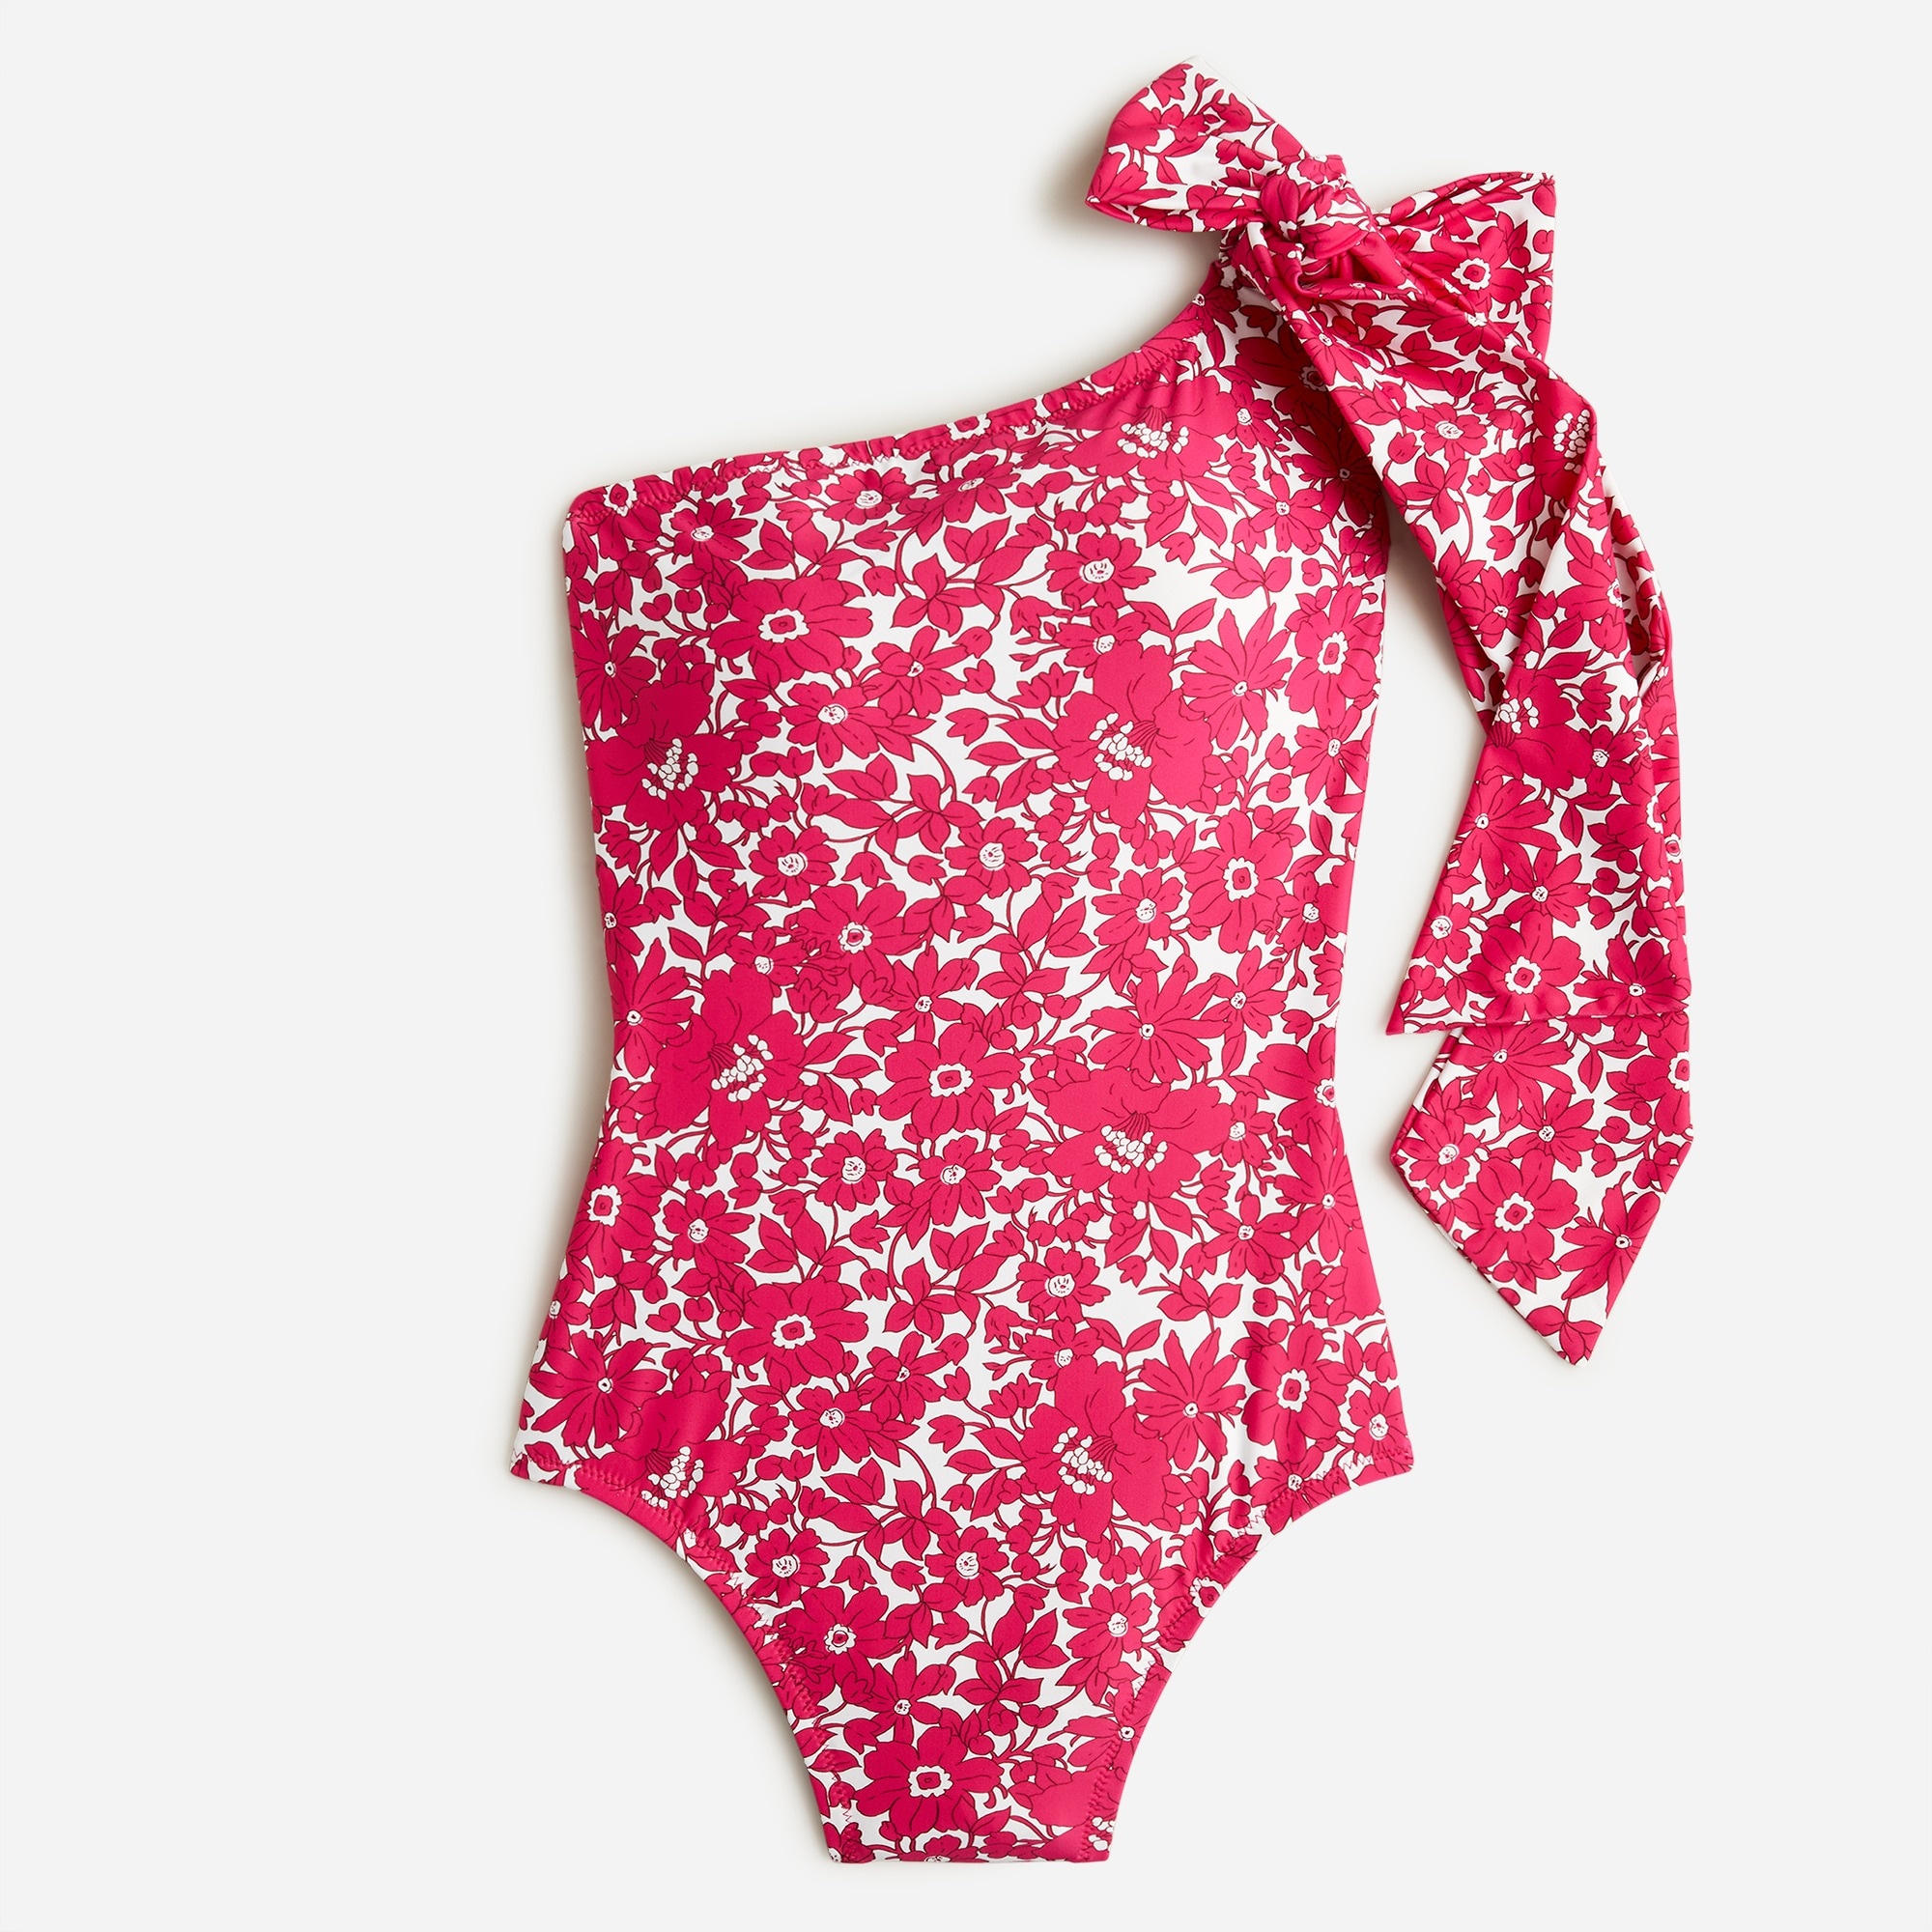  Bow one-shoulder one-piece swimsuit in blushing meadow